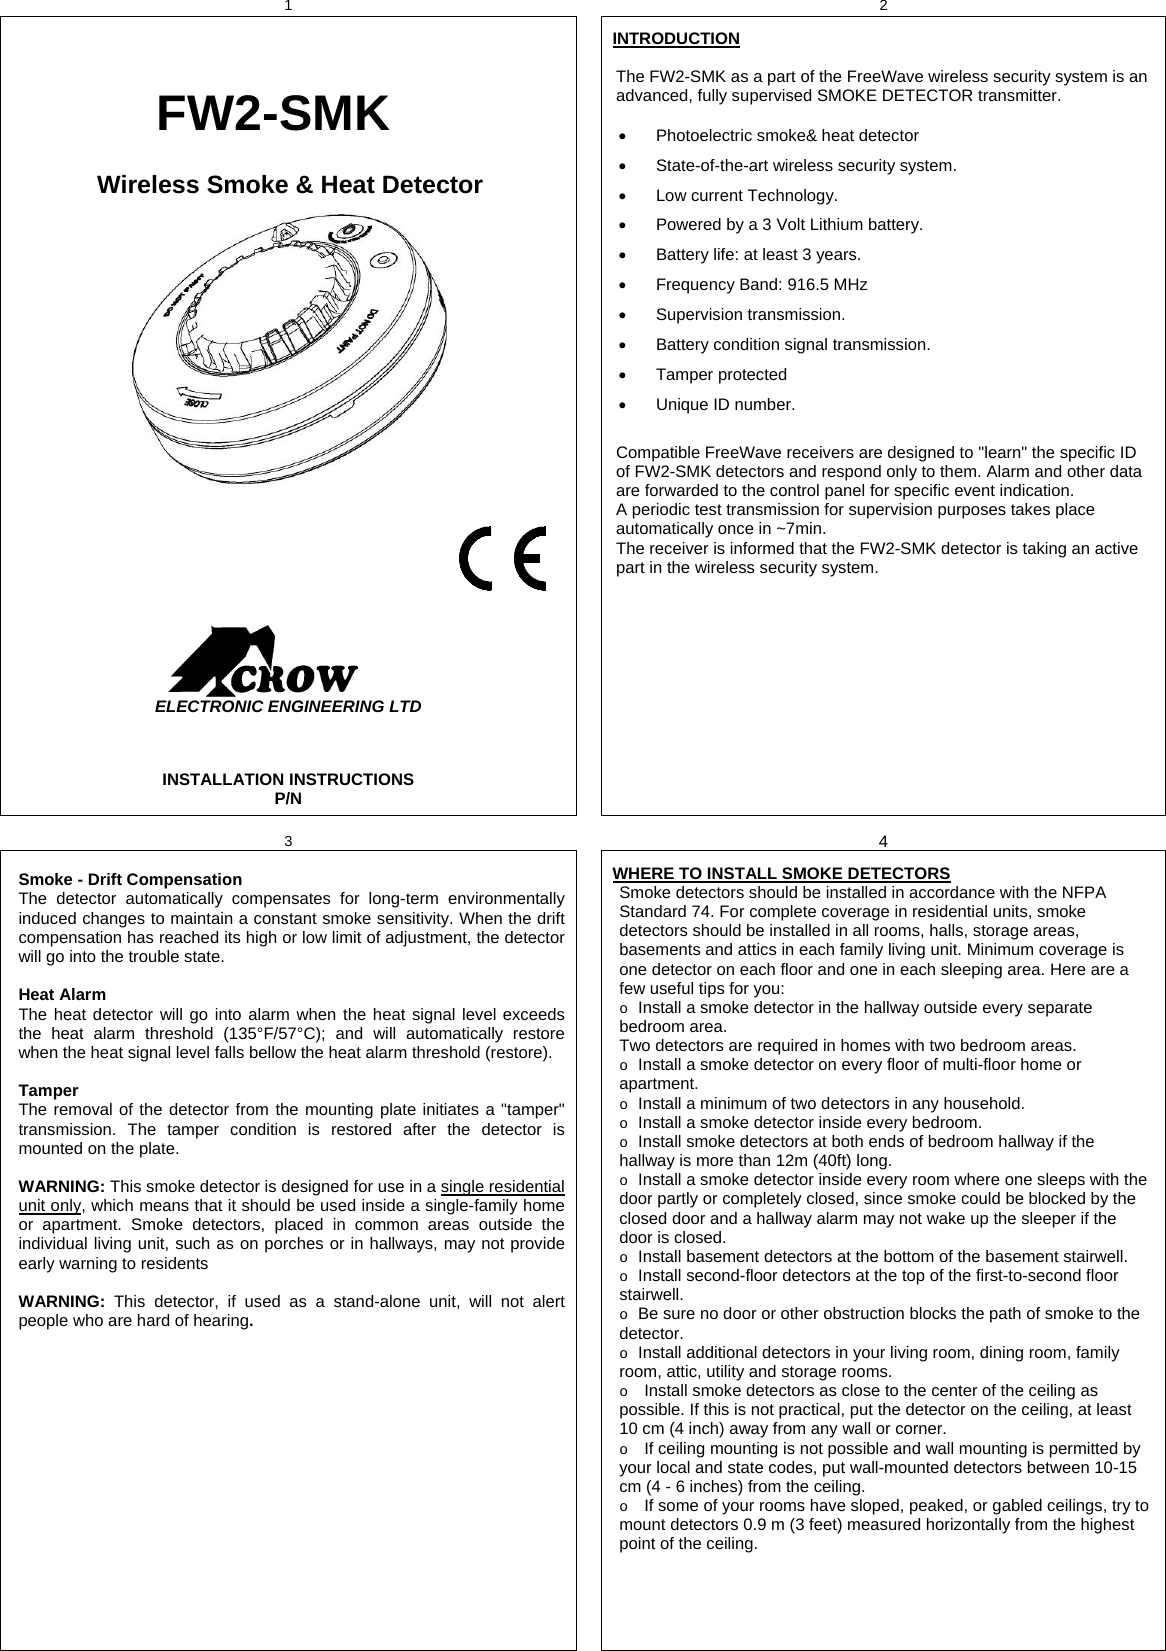 1  2    FW2-SMK Wireless Smoke &amp; Heat Detector                                                                           ELECTRONIC ENGINEERING LTD  INSTALLATION INSTRUCTIONS P/N   INTRODUCTION  The FW2-SMK as a part of the FreeWave wireless security system is an advanced, fully supervised SMOKE DETECTOR transmitter.    Photoelectric smoke&amp; heat detector   State-of-the-art wireless security system.   Low current Technology.    Powered by a 3 Volt Lithium battery.   Battery life: at least 3 years.   Frequency Band: 916.5 MHz  Supervision transmission.   Battery condition signal transmission.  Tamper protected    Unique ID number.  Compatible FreeWave receivers are designed to &quot;learn&quot; the specific ID of FW2-SMK detectors and respond only to them. Alarm and other data are forwarded to the control panel for specific event indication. A periodic test transmission for supervision purposes takes place automatically once in ~7min.  The receiver is informed that the FW2-SMK detector is taking an active part in the wireless security system.   3  4  Smoke - Drift Compensation The detector automatically compensates for long-term environmentally induced changes to maintain a constant smoke sensitivity. When the drift compensation has reached its high or low limit of adjustment, the detector will go into the trouble state.  Heat Alarm The heat detector will go into alarm when the heat signal level exceeds the heat alarm threshold (135°F/57°C); and will automatically restore when the heat signal level falls bellow the heat alarm threshold (restore).   Tamper The removal of the detector from the mounting plate initiates a &quot;tamper&quot; transmission. The tamper condition is restored after the detector is mounted on the plate.  WARNING: This smoke detector is designed for use in a single residential unit only, which means that it should be used inside a single-family home or apartment. Smoke detectors, placed in common areas outside the individual living unit, such as on porches or in hallways, may not provide early warning to residents   WARNING:  This detector, if used as a stand-alone unit, will not alert people who are hard of hearing.   WHERE TO INSTALL SMOKE DETECTORS Smoke detectors should be installed in accordance with the NFPA Standard 74. For complete coverage in residential units, smoke detectors should be installed in all rooms, halls, storage areas, basements and attics in each family living unit. Minimum coverage is one detector on each floor and one in each sleeping area. Here are a few useful tips for you: o Install a smoke detector in the hallway outside every separate bedroom area.  Two detectors are required in homes with two bedroom areas. o Install a smoke detector on every floor of multi-floor home or apartment. o Install a minimum of two detectors in any household. o Install a smoke detector inside every bedroom. o Install smoke detectors at both ends of bedroom hallway if the hallway is more than 12m (40ft) long. o Install a smoke detector inside every room where one sleeps with the door partly or completely closed, since smoke could be blocked by the closed door and a hallway alarm may not wake up the sleeper if the door is closed. o Install basement detectors at the bottom of the basement stairwell. o Install second-floor detectors at the top of the first-to-second floor stairwell. o Be sure no door or other obstruction blocks the path of smoke to the detector. o Install additional detectors in your living room, dining room, family room, attic, utility and storage rooms. o Install smoke detectors as close to the center of the ceiling as possible. If this is not practical, put the detector on the ceiling, at least 10 cm (4 inch) away from any wall or corner. o If ceiling mounting is not possible and wall mounting is permitted by your local and state codes, put wall-mounted detectors between 10-15 cm (4 - 6 inches) from the ceiling. o If some of your rooms have sloped, peaked, or gabled ceilings, try to mount detectors 0.9 m (3 feet) measured horizontally from the highest point of the ceiling.   